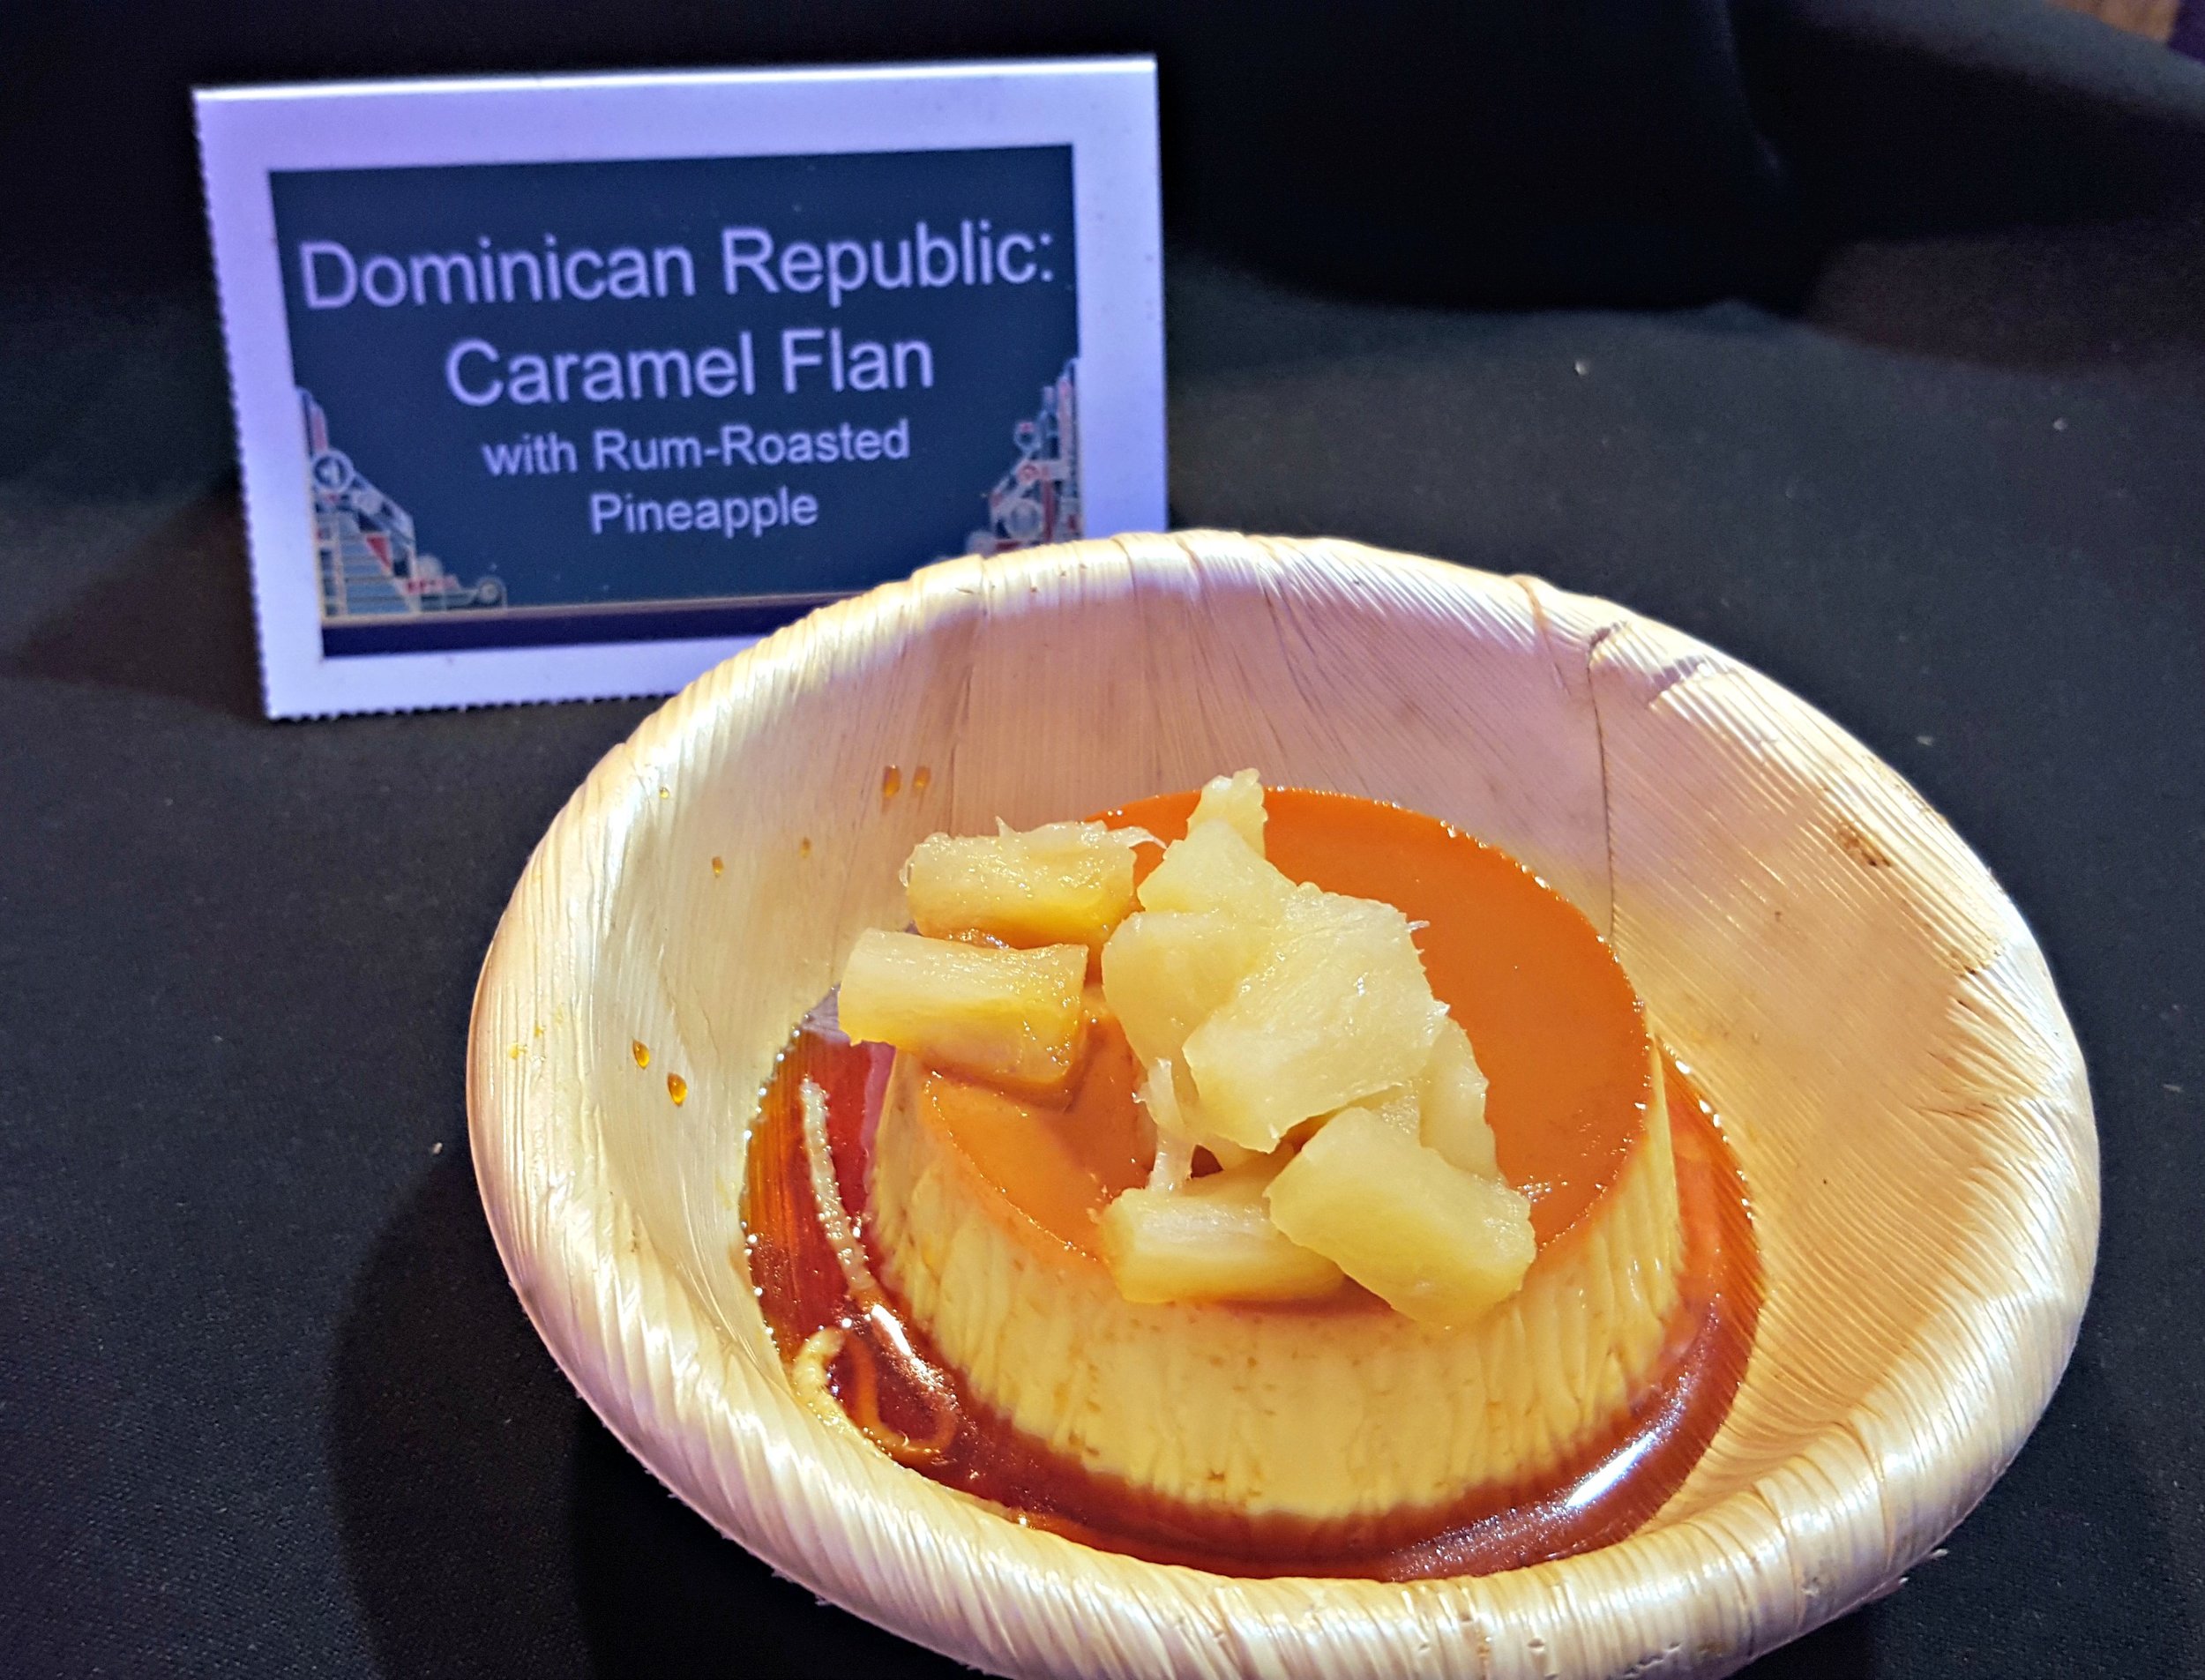 Caramel Flan with Rum Roasted Pineapples